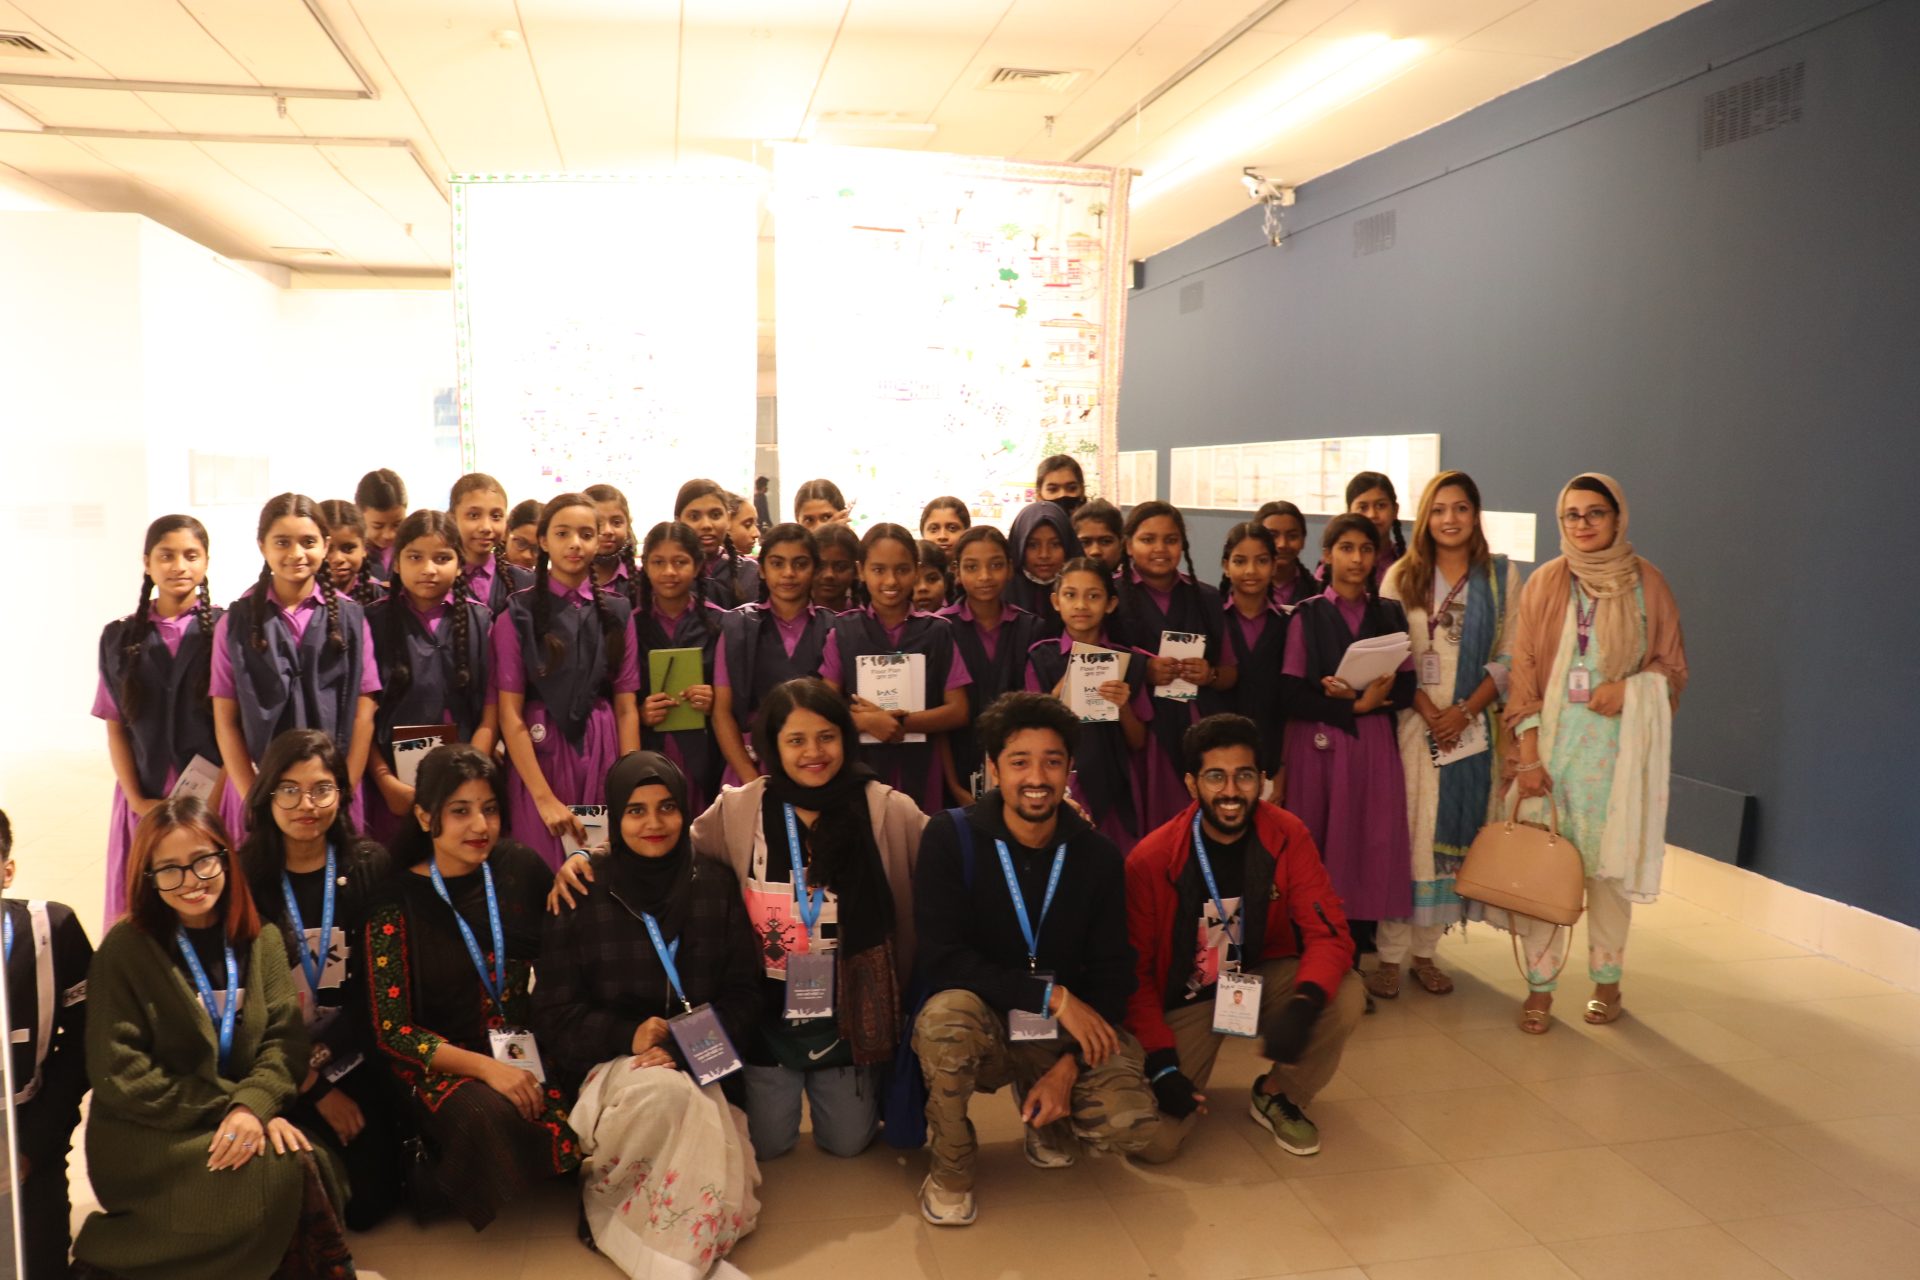 The senior classes of the school were invited to attend the Dhaka Art Summit 2023, in which they learned a lot of very unique styles of design, illustrations and art.